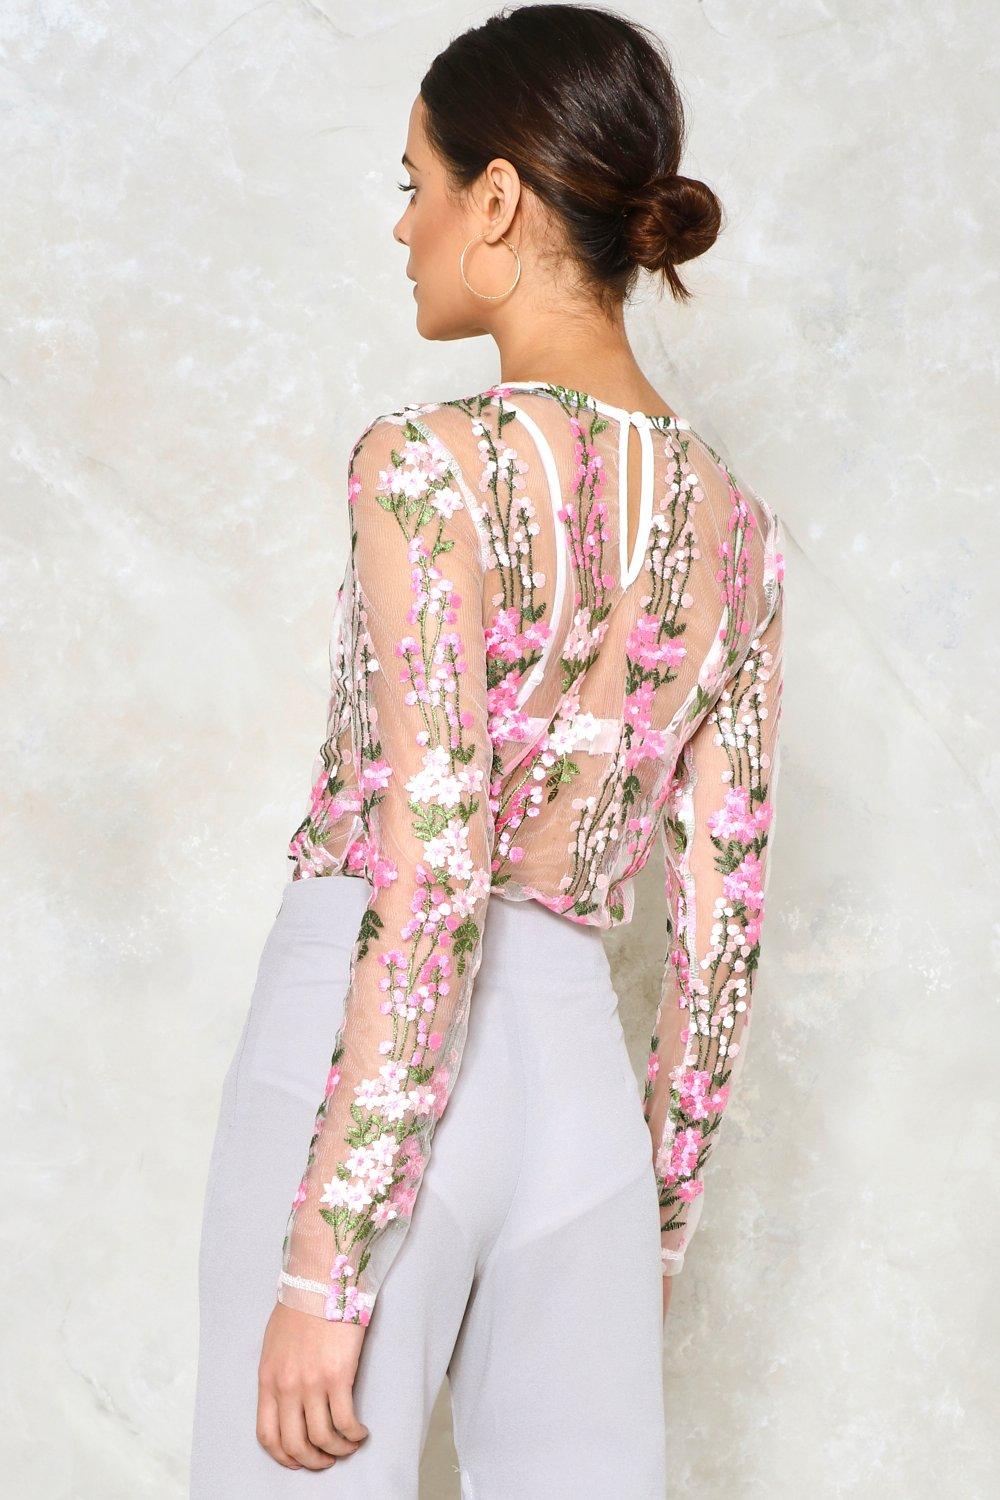 April Showers Embroidered Bodysuit